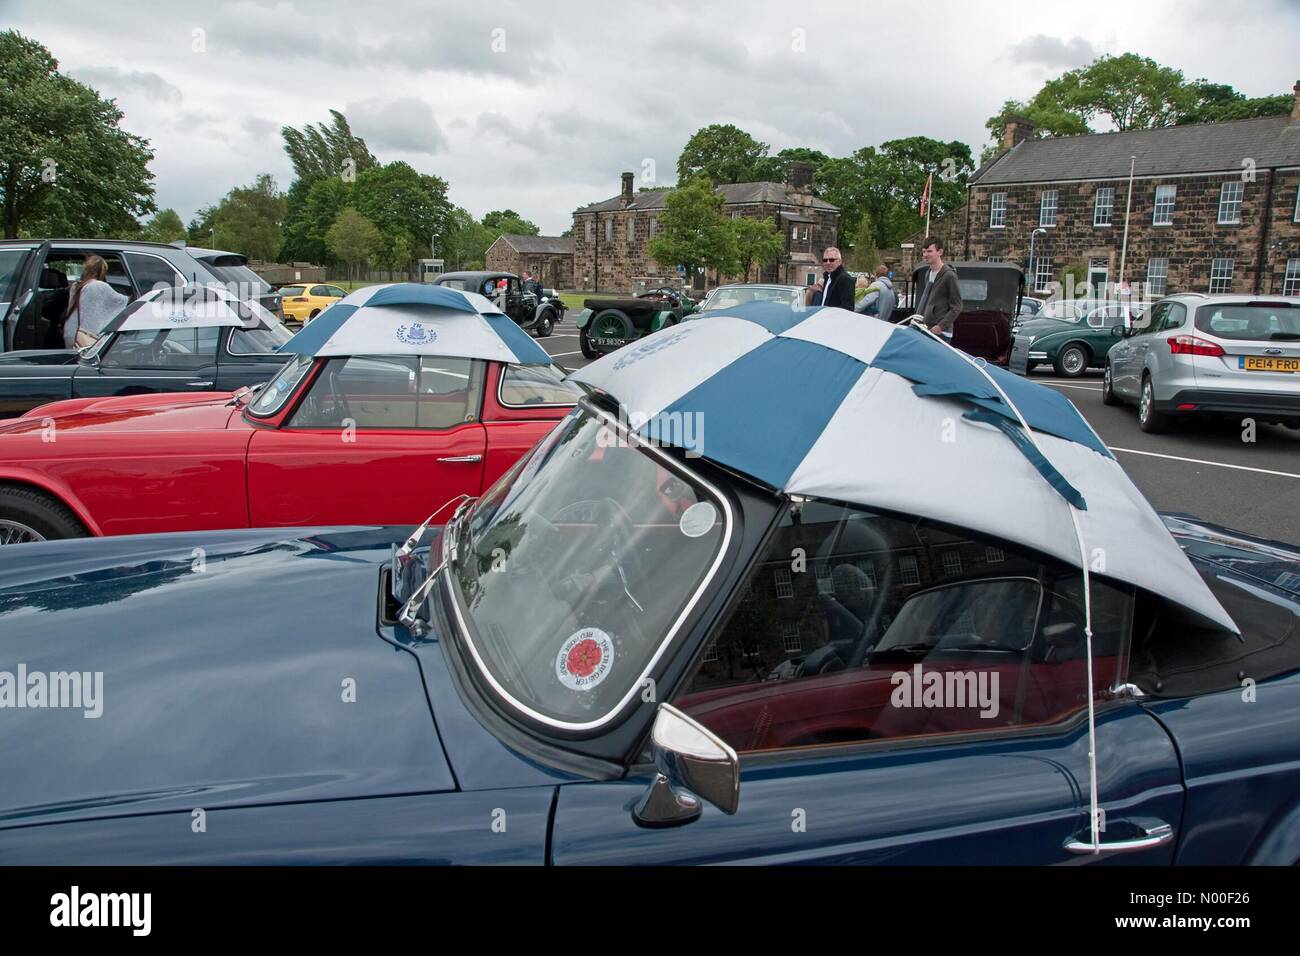 Preston, UK. 11th June, 2017. UK weather. Sports cars in the annual Manchester to Blackpool car rally put their top bonnets on in case of showers during a lunch stop at the Lancashire Infantry Museum in Fulwood Barracks, Preston Credit: Roger Goodwin/StockimoNews/Alamy Live News Stock Photo